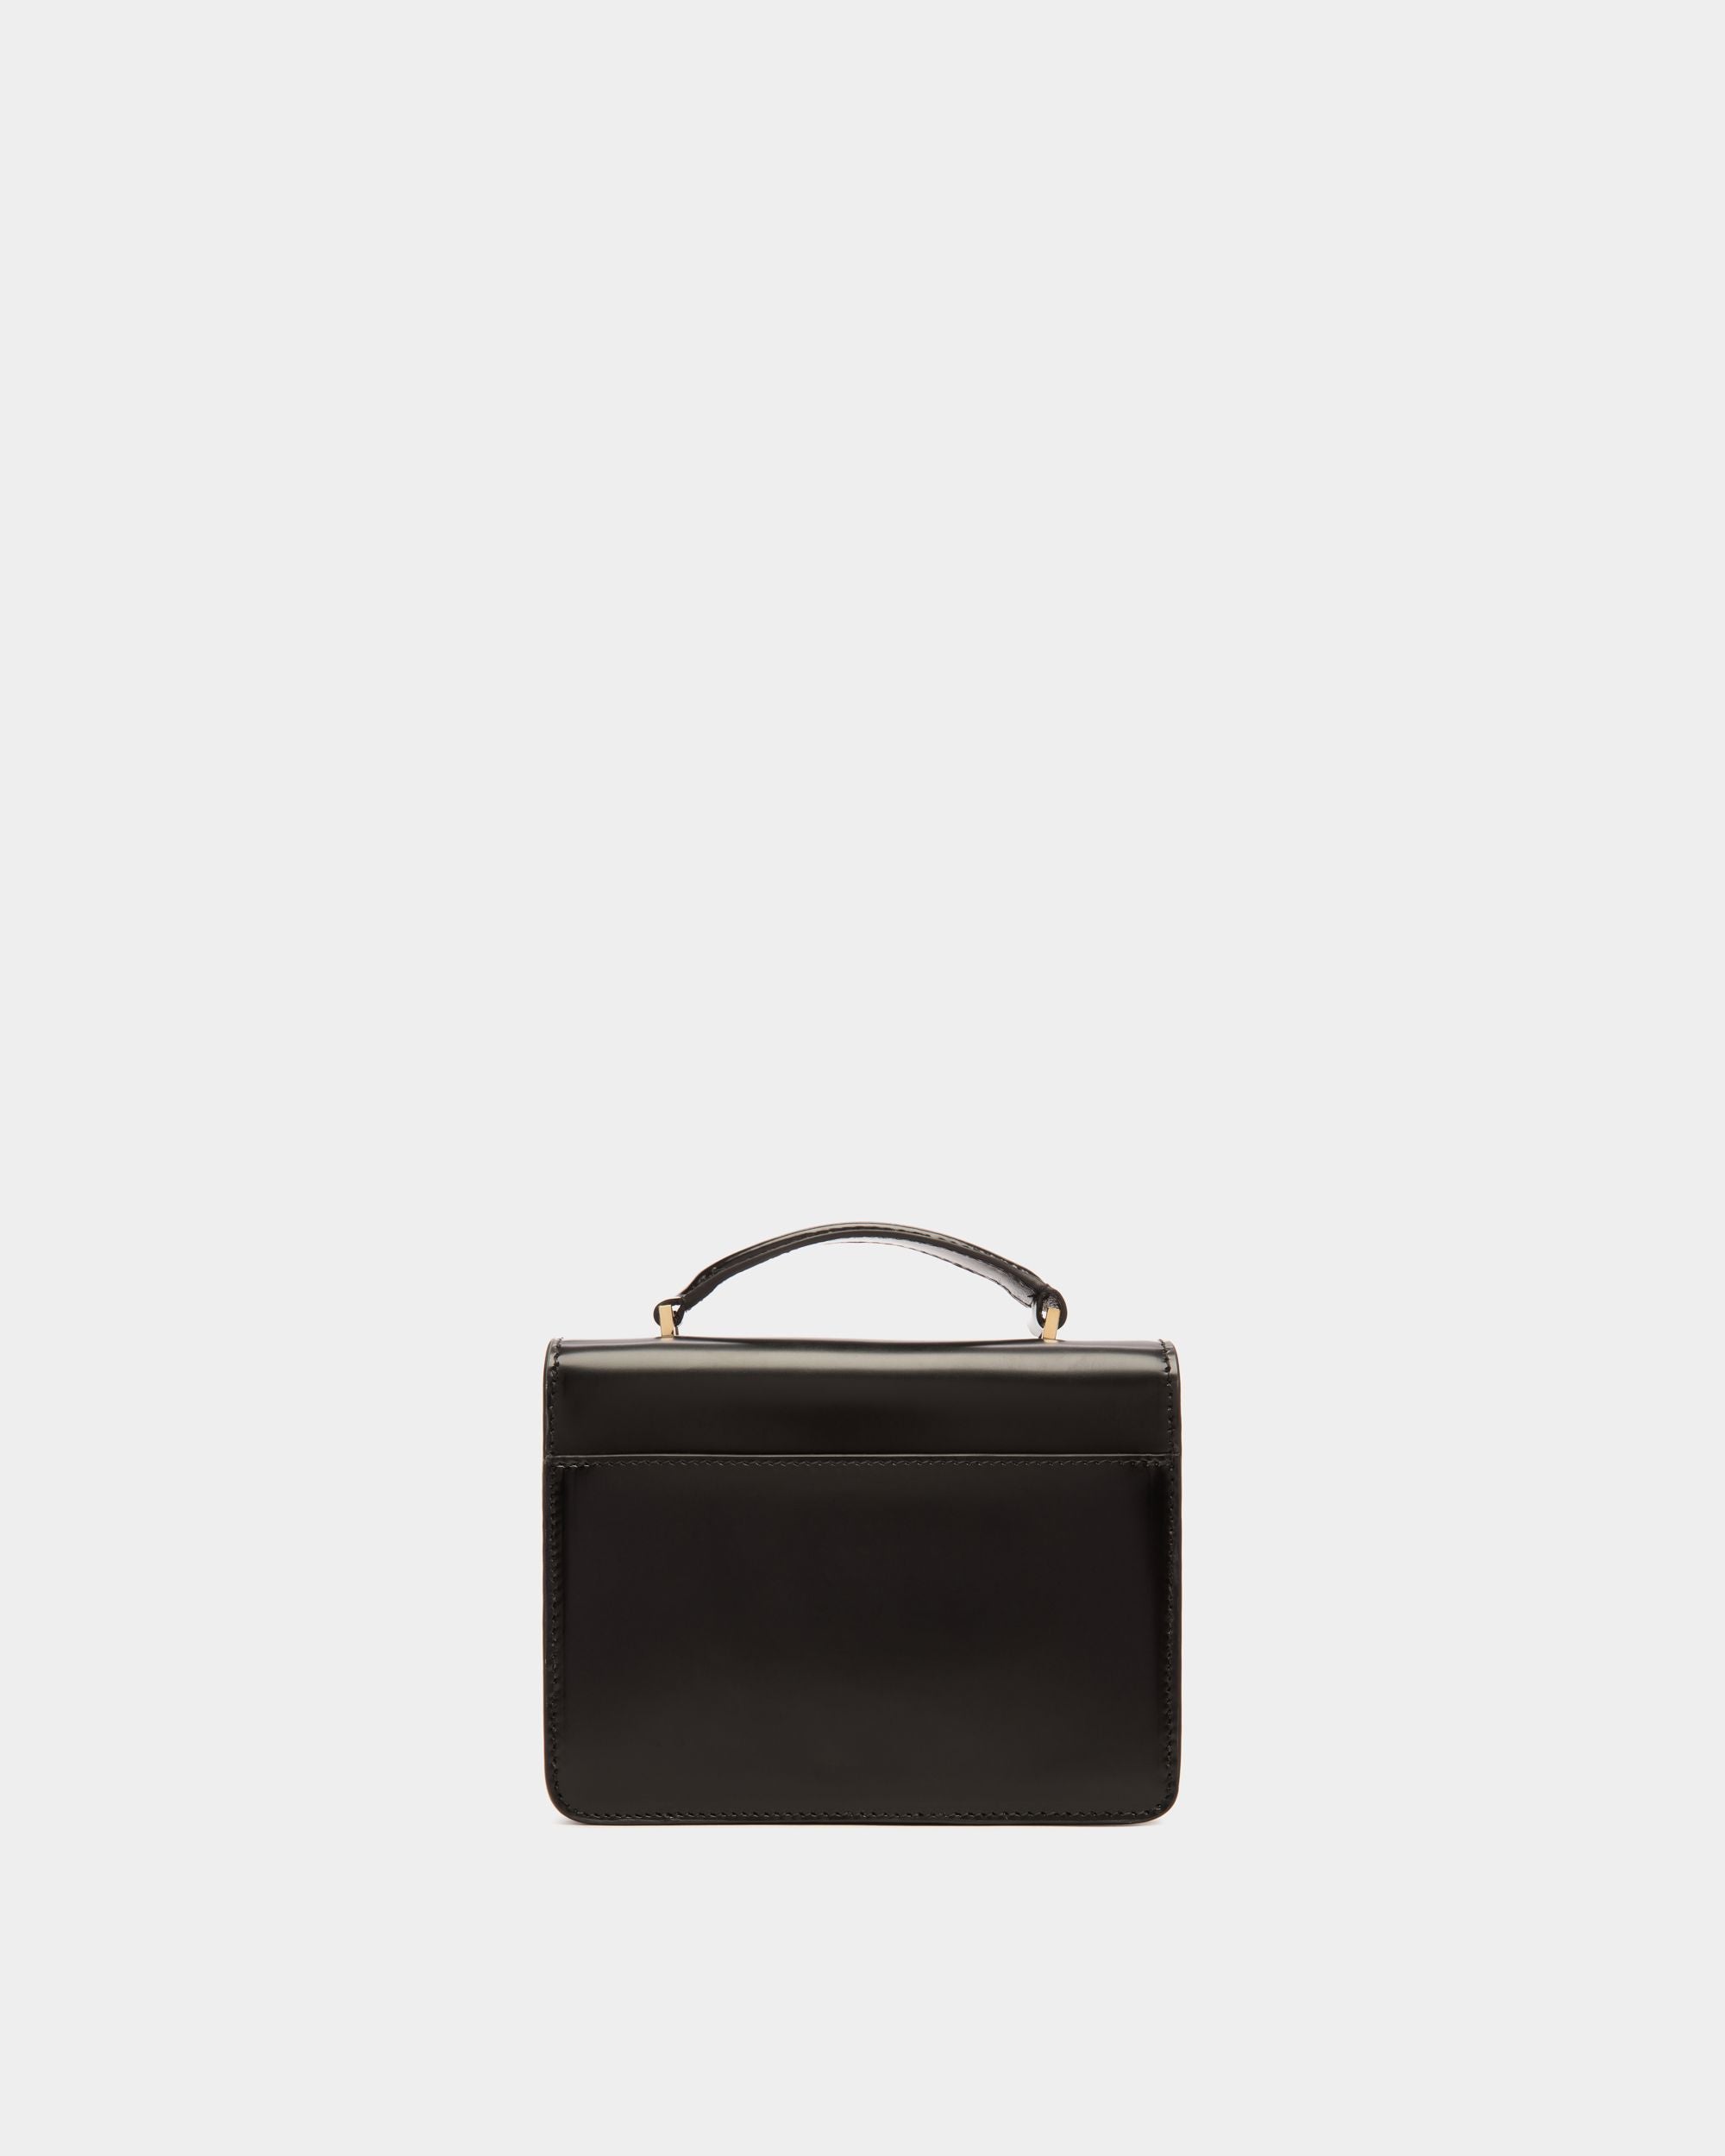 Ollam | Women's Mini Top Handle Bag in Black Brushed Leather | Bally | Still Life Back